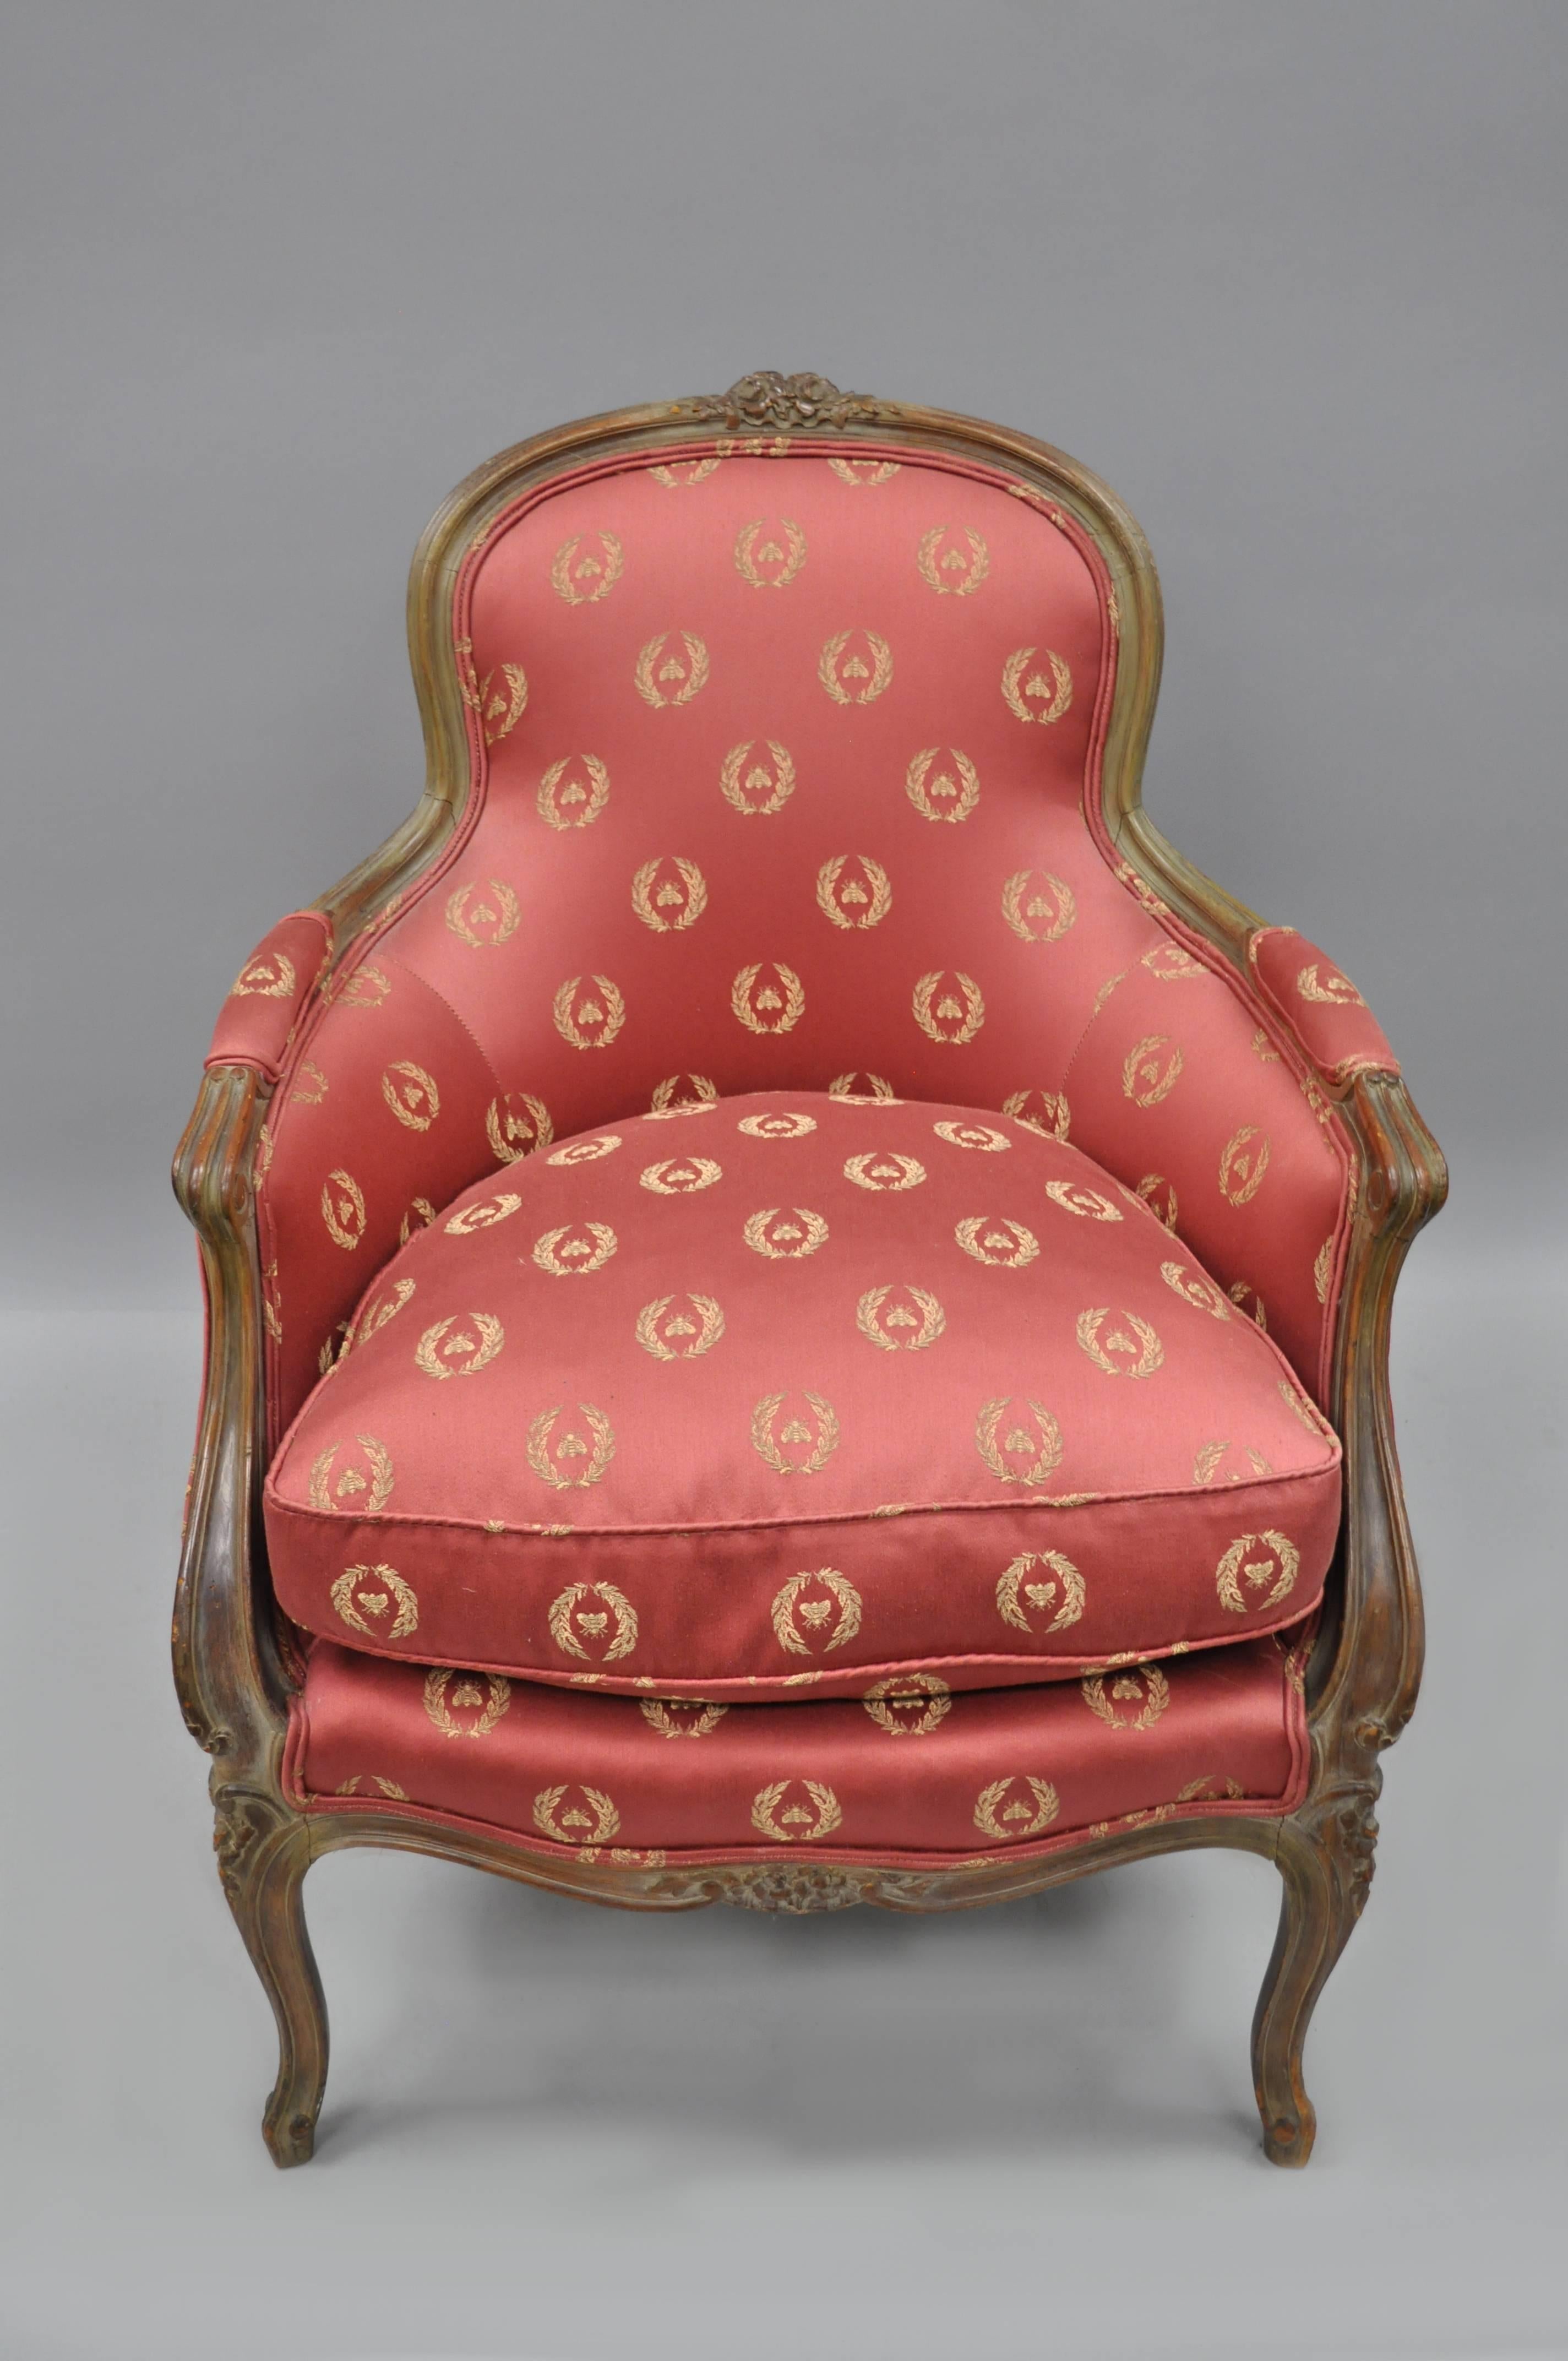 Antique French country / Louis XV style Bergere armchair. Chair features upholstered armrests, floral carved top tail, cabriole legs, and a desirable antiqued / distressed finish to the solid wood frame.